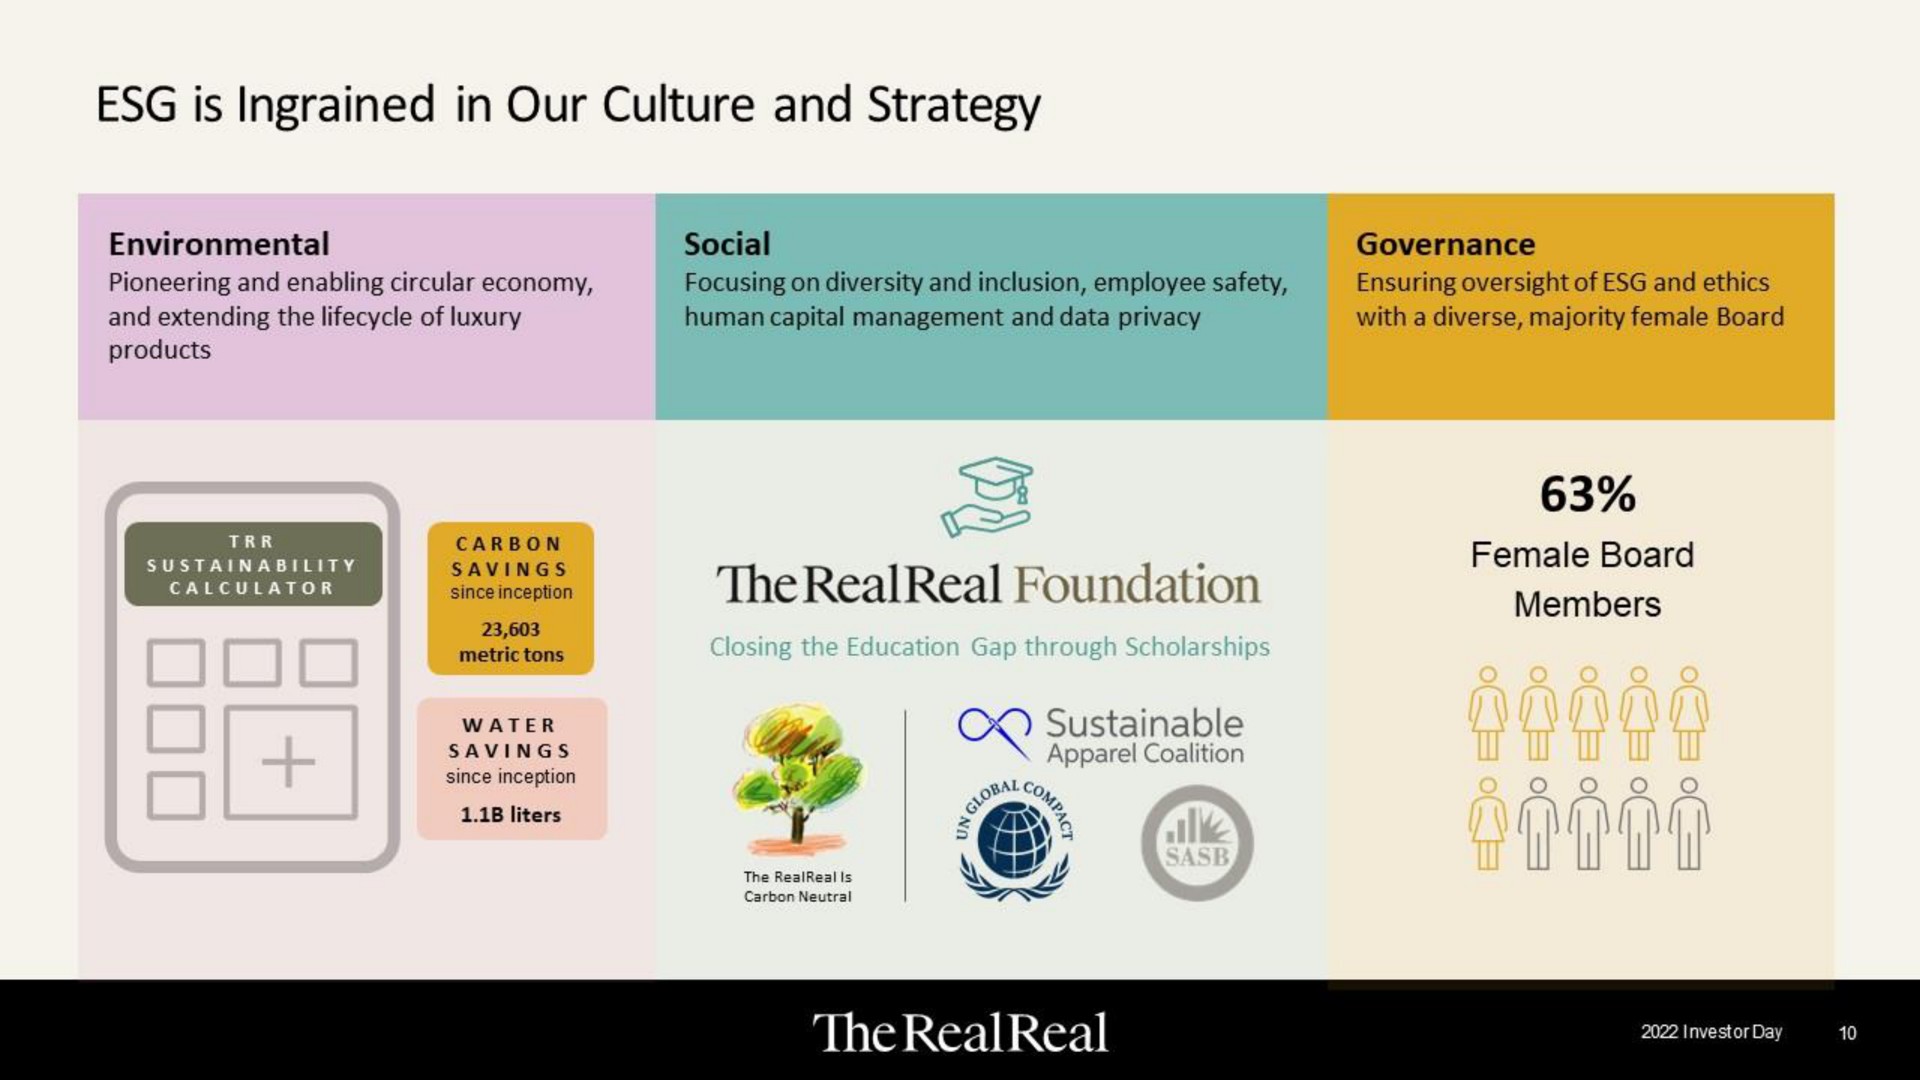 is ingrained in our culture and strategy | The RealReal